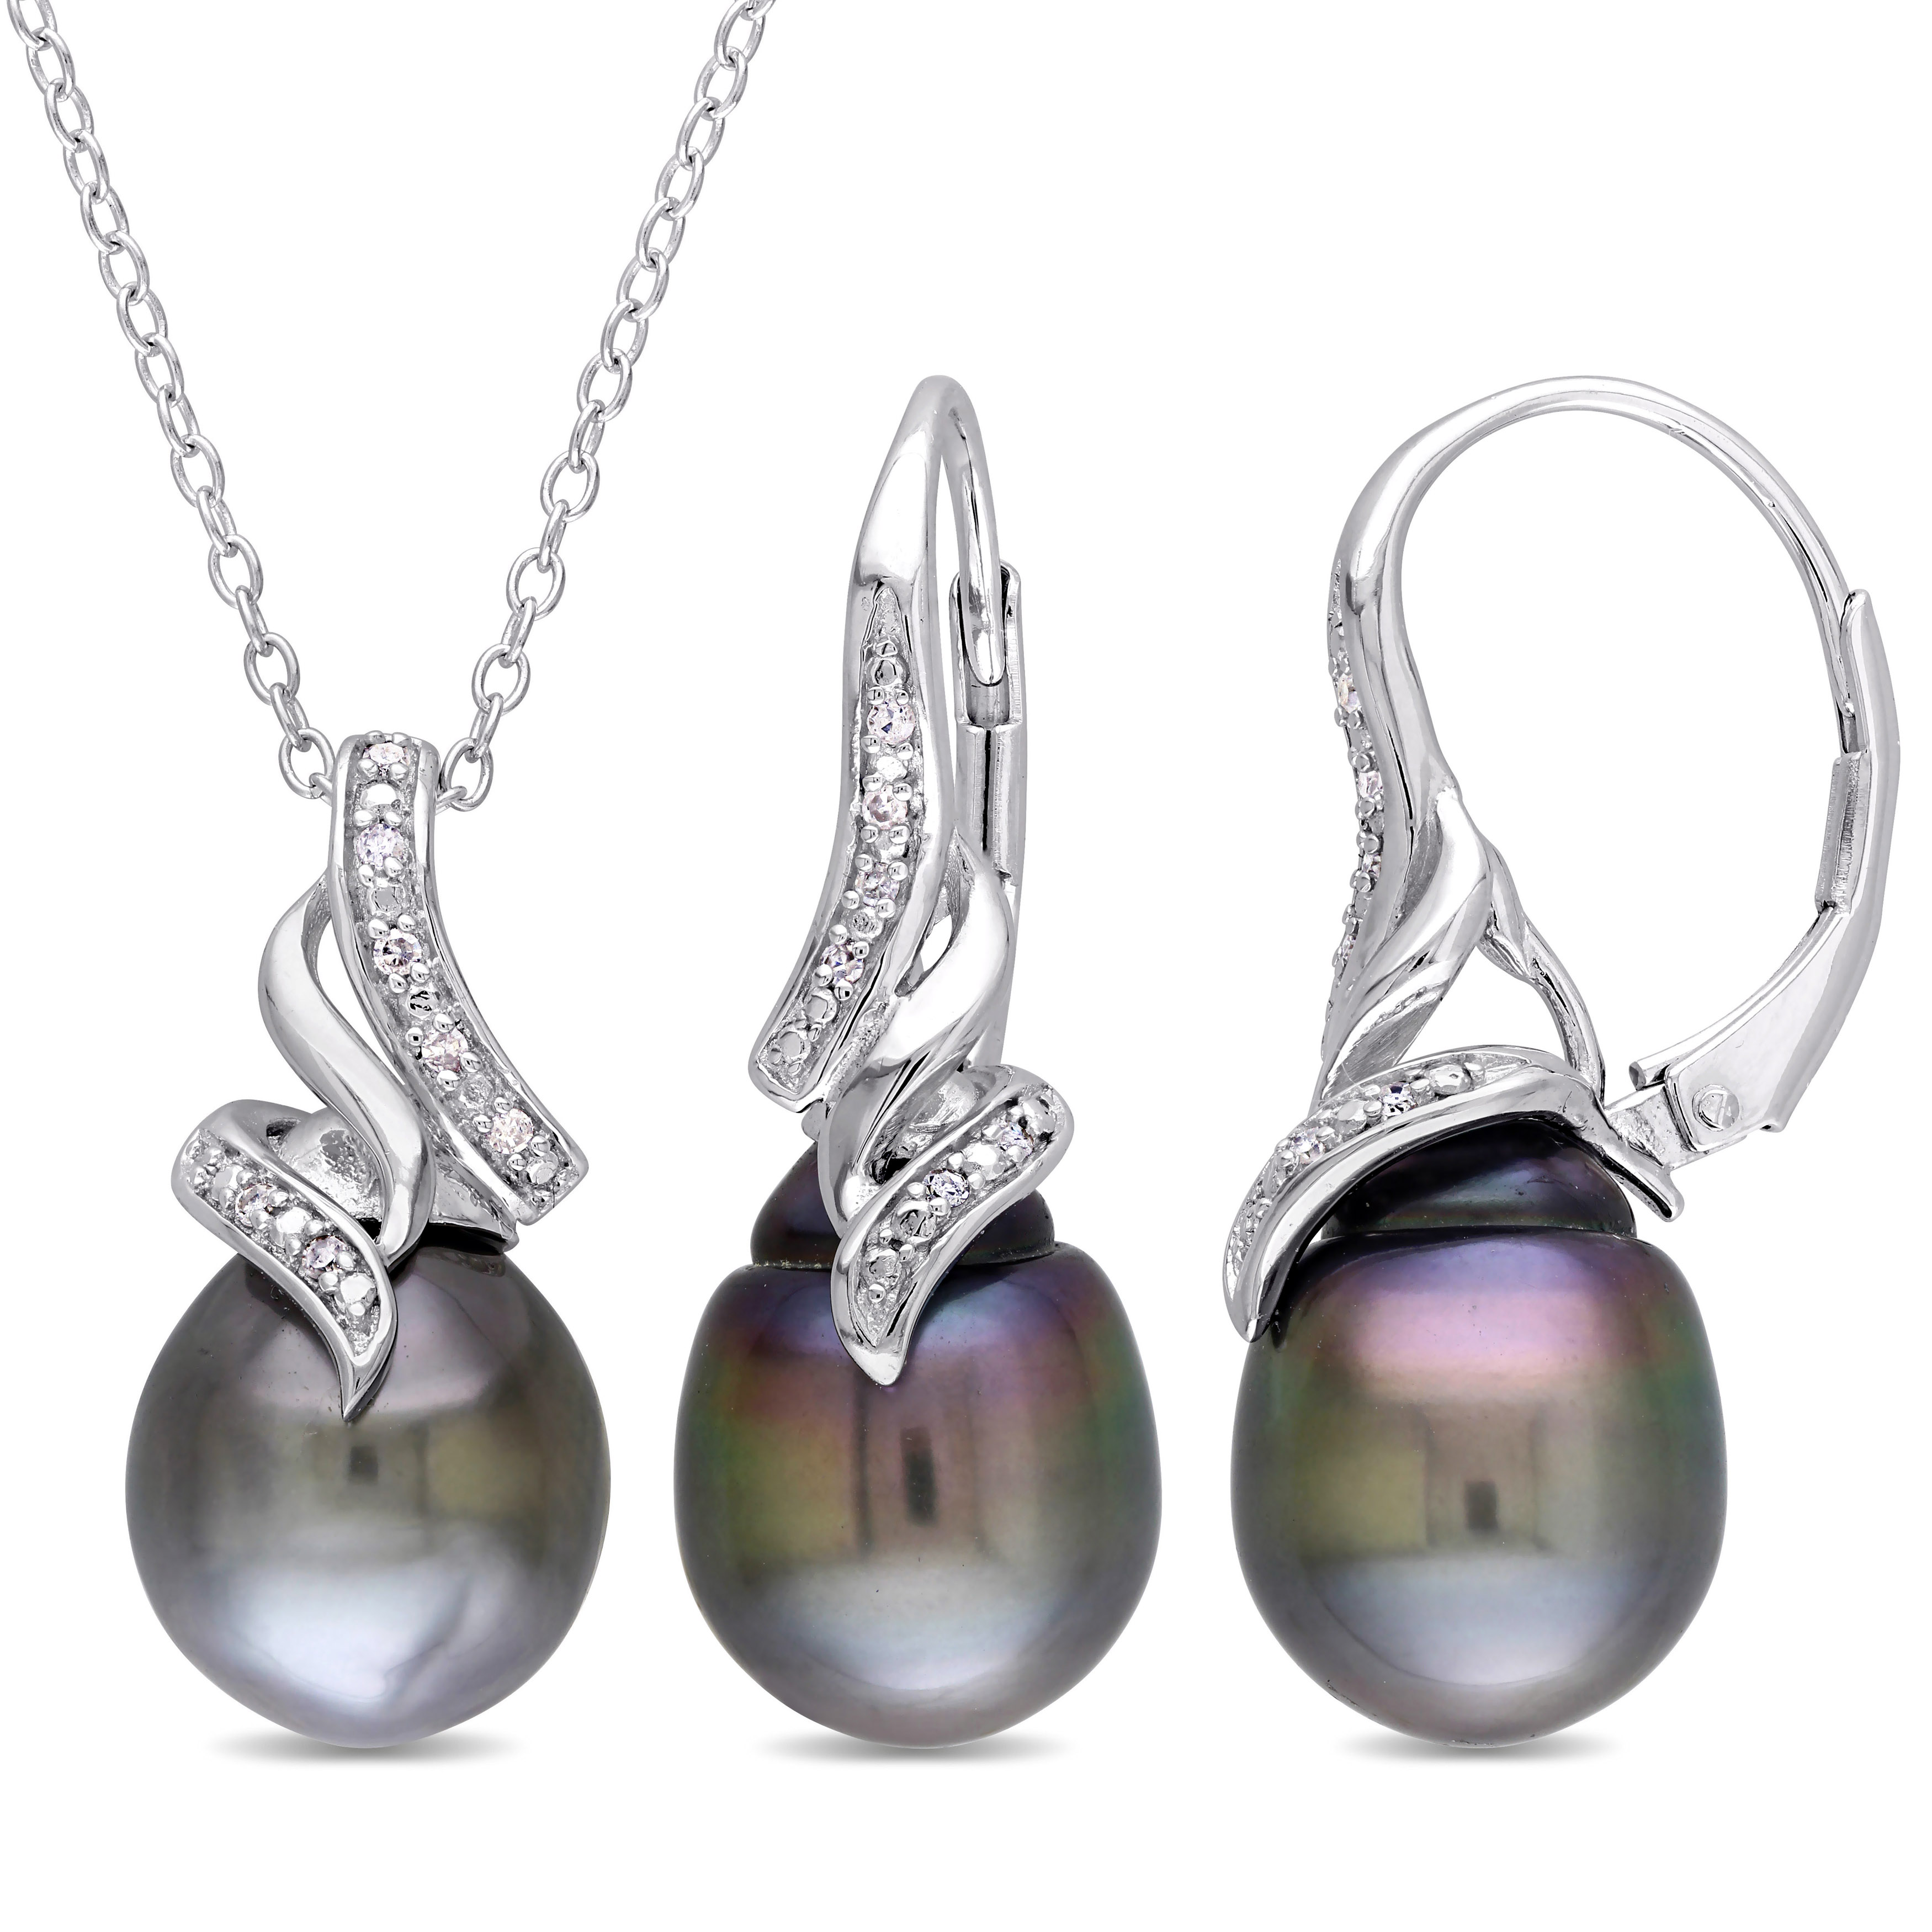 1/10 CT Diamond TW 9 - 9.5 MM Tahitian Cultured Pearl Earrings and Pendant With Chain Set in Sterling Silver